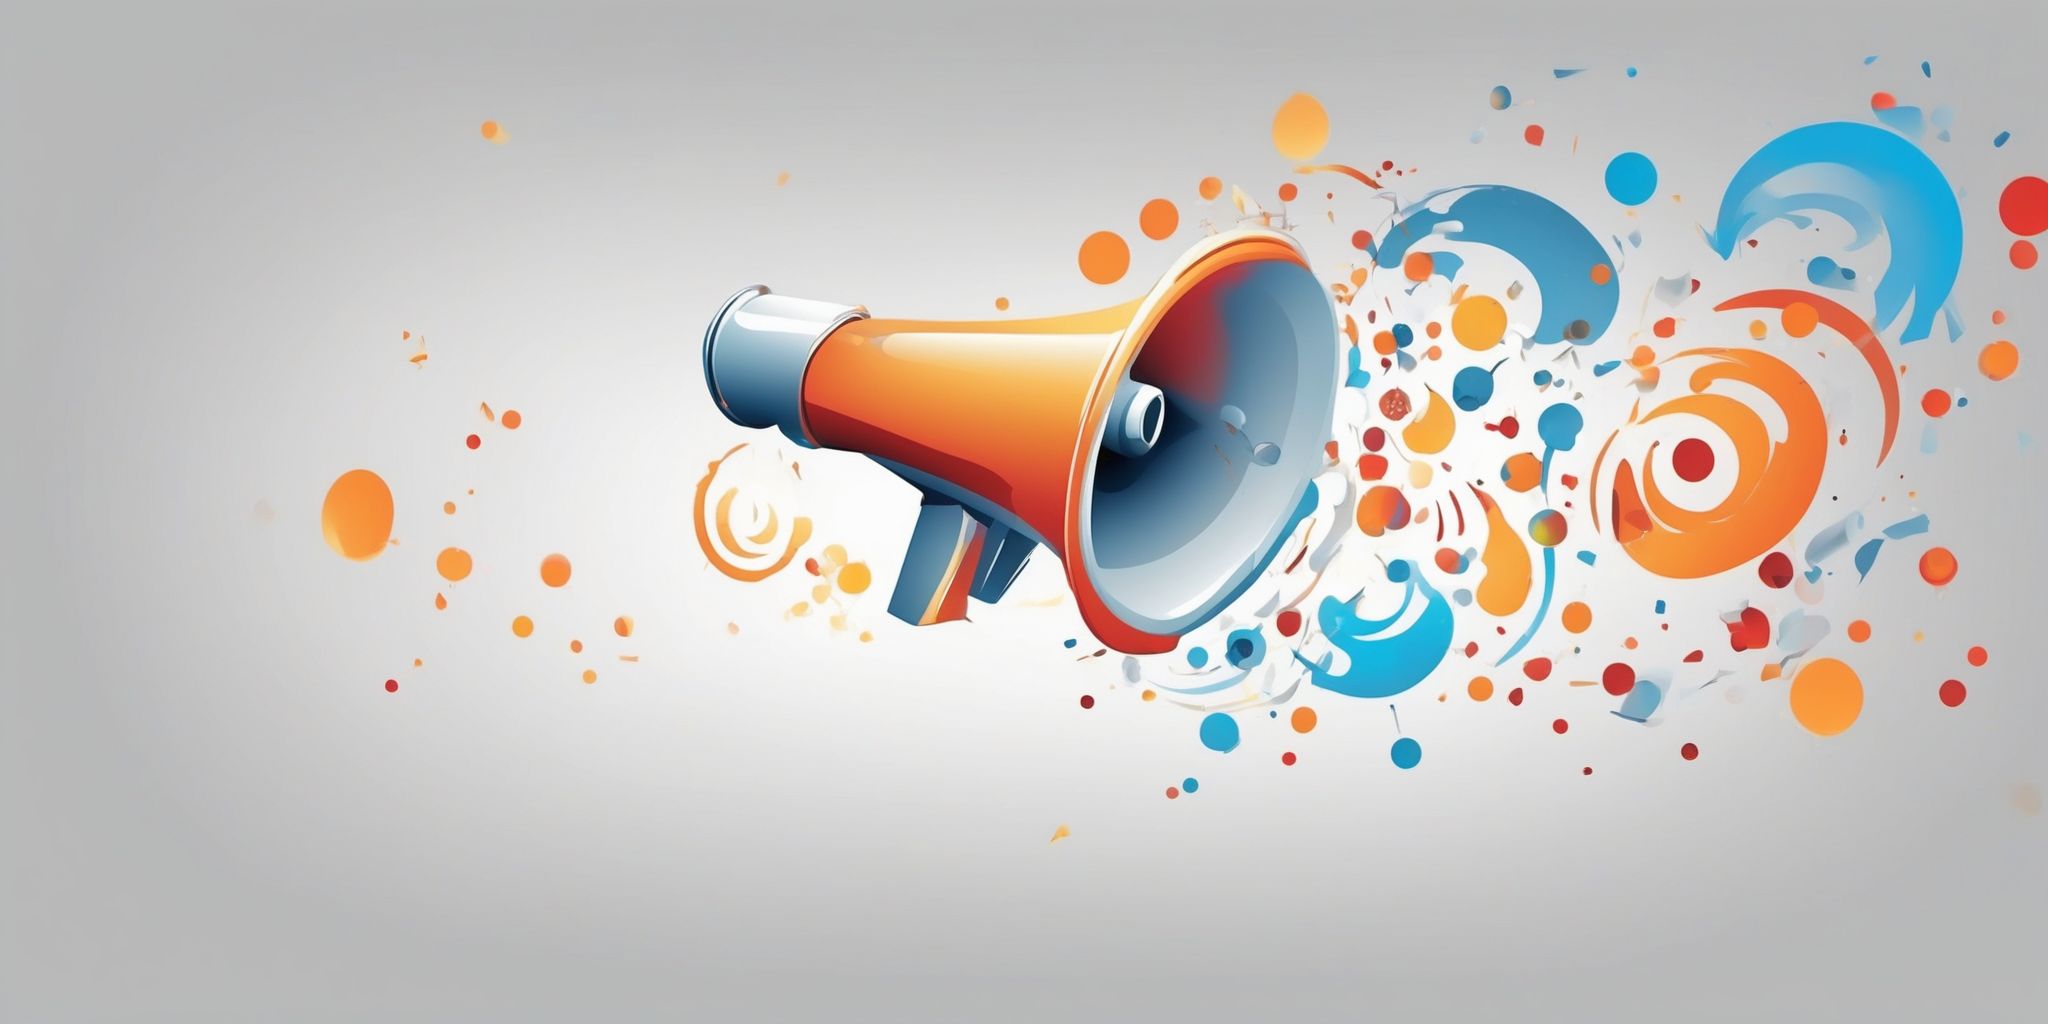 Marketing: Megaphone in illustration style with gradients and white background